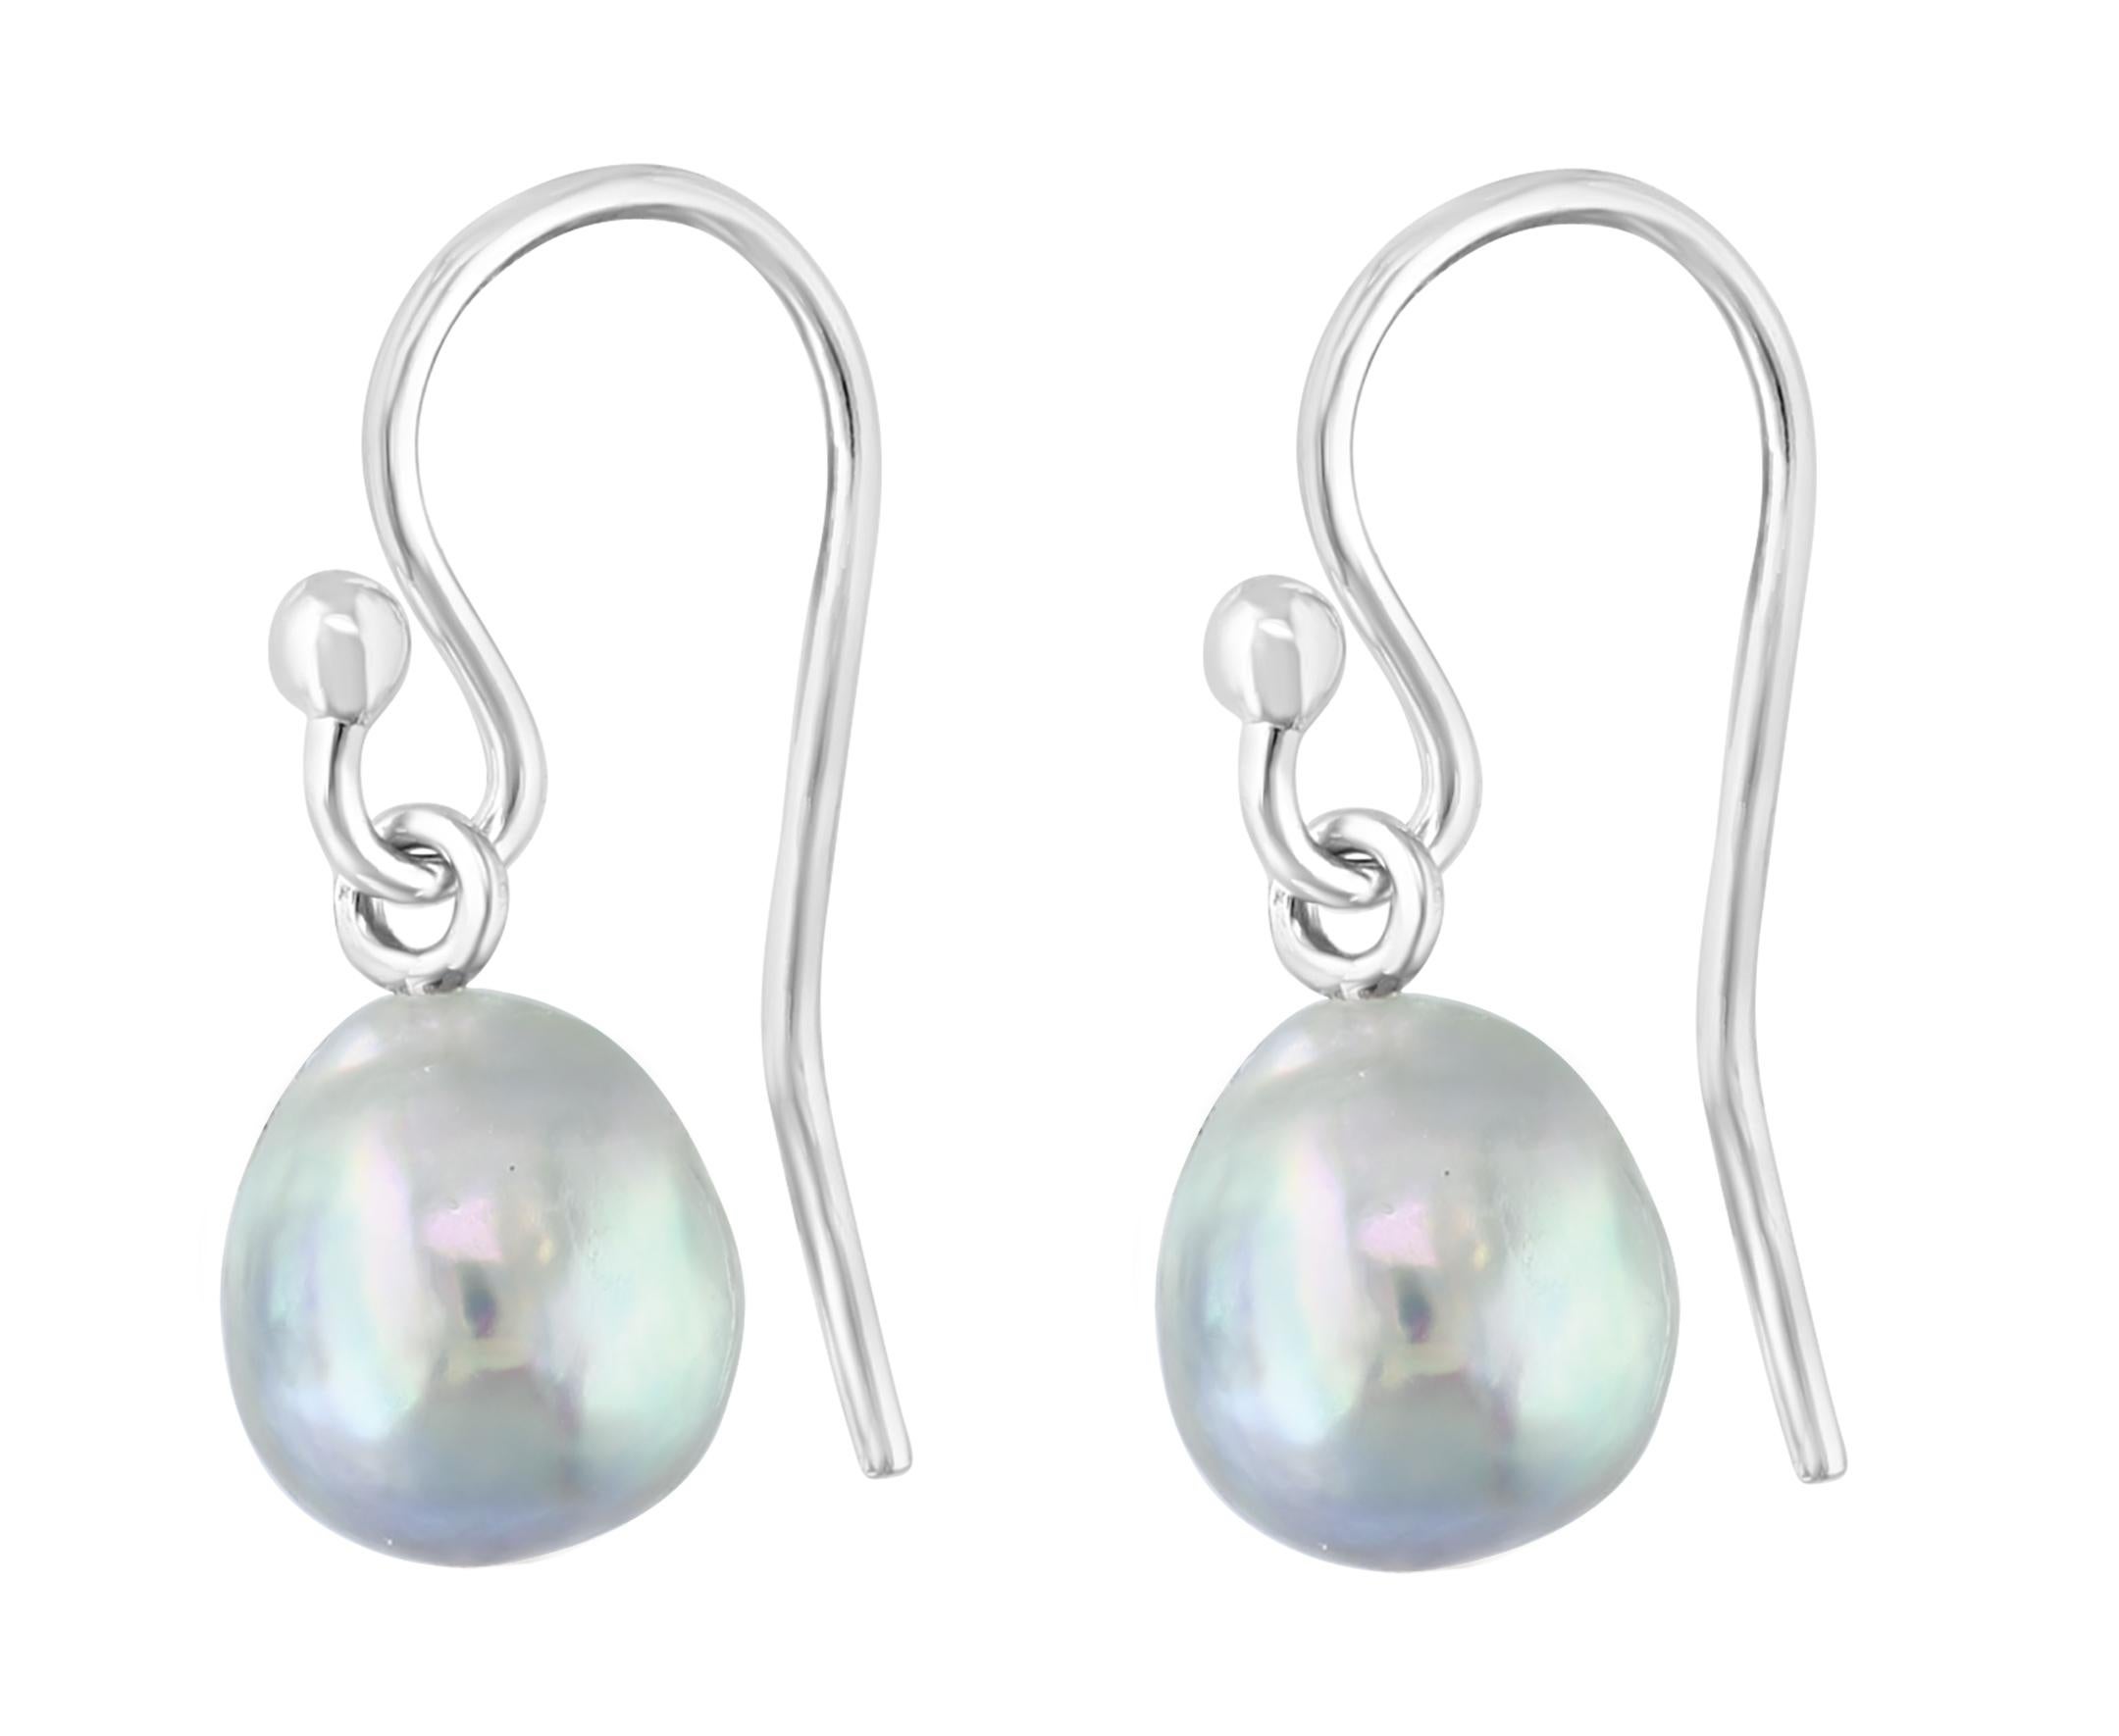 These earrings feature Japanese Akoya natural-blue color 7-8mm semi-baroque pearls on sterling silver ear wires. Simple yet unique, these earrings will truly stand out.
AN ELEGANT EXPRESSION – This gorgeous cultured pearl jewelry adds a luminous